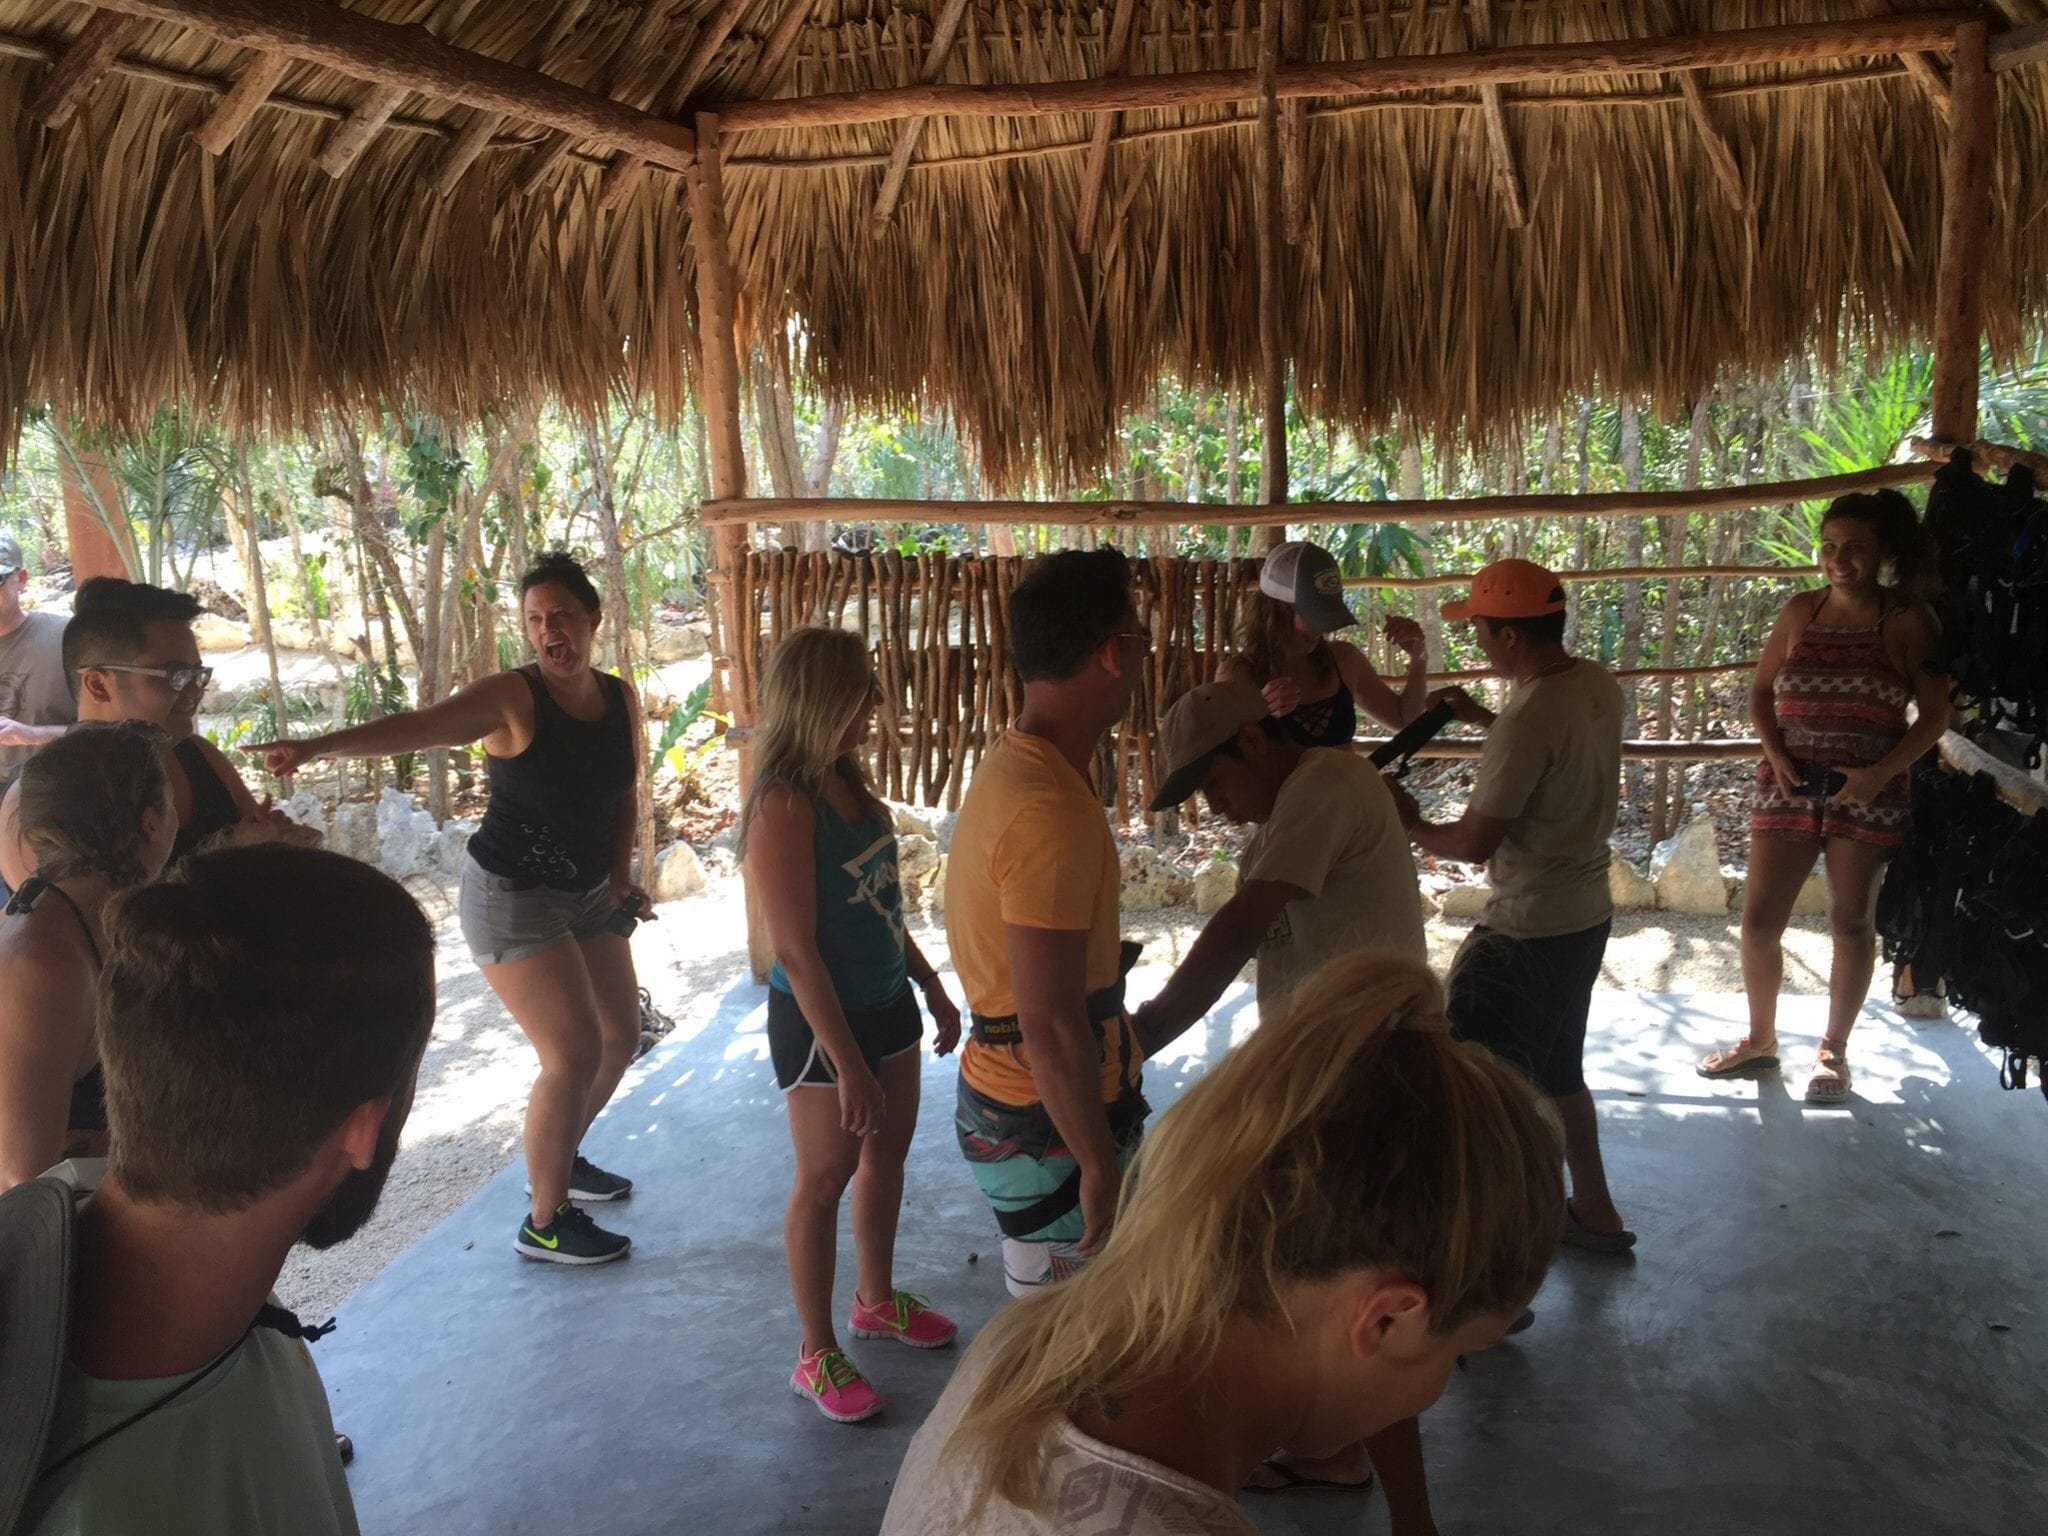 One of the BEST things to do in Tulum is take a tour with Adventure Tour Center who specialize in Tulum tours.